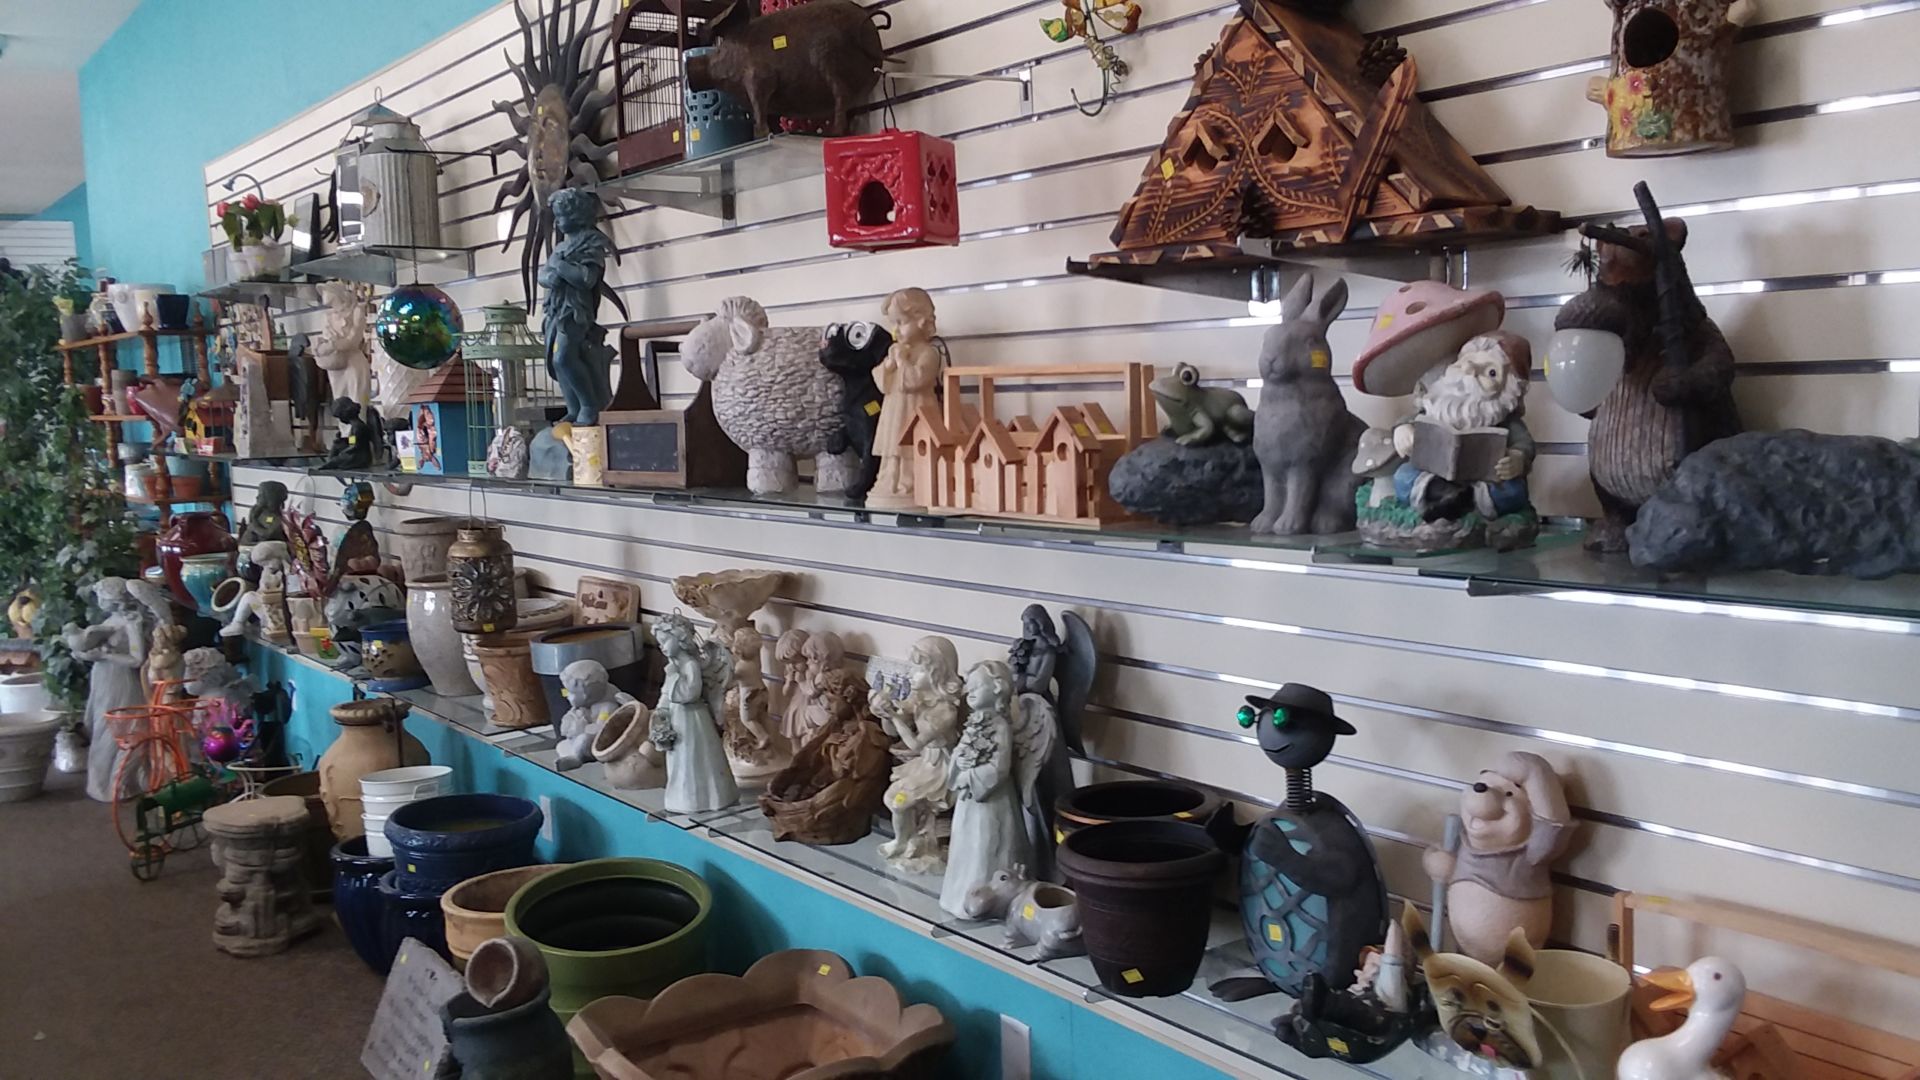 A shelf of ceramic and concrete lawn ornaments and animal statues.